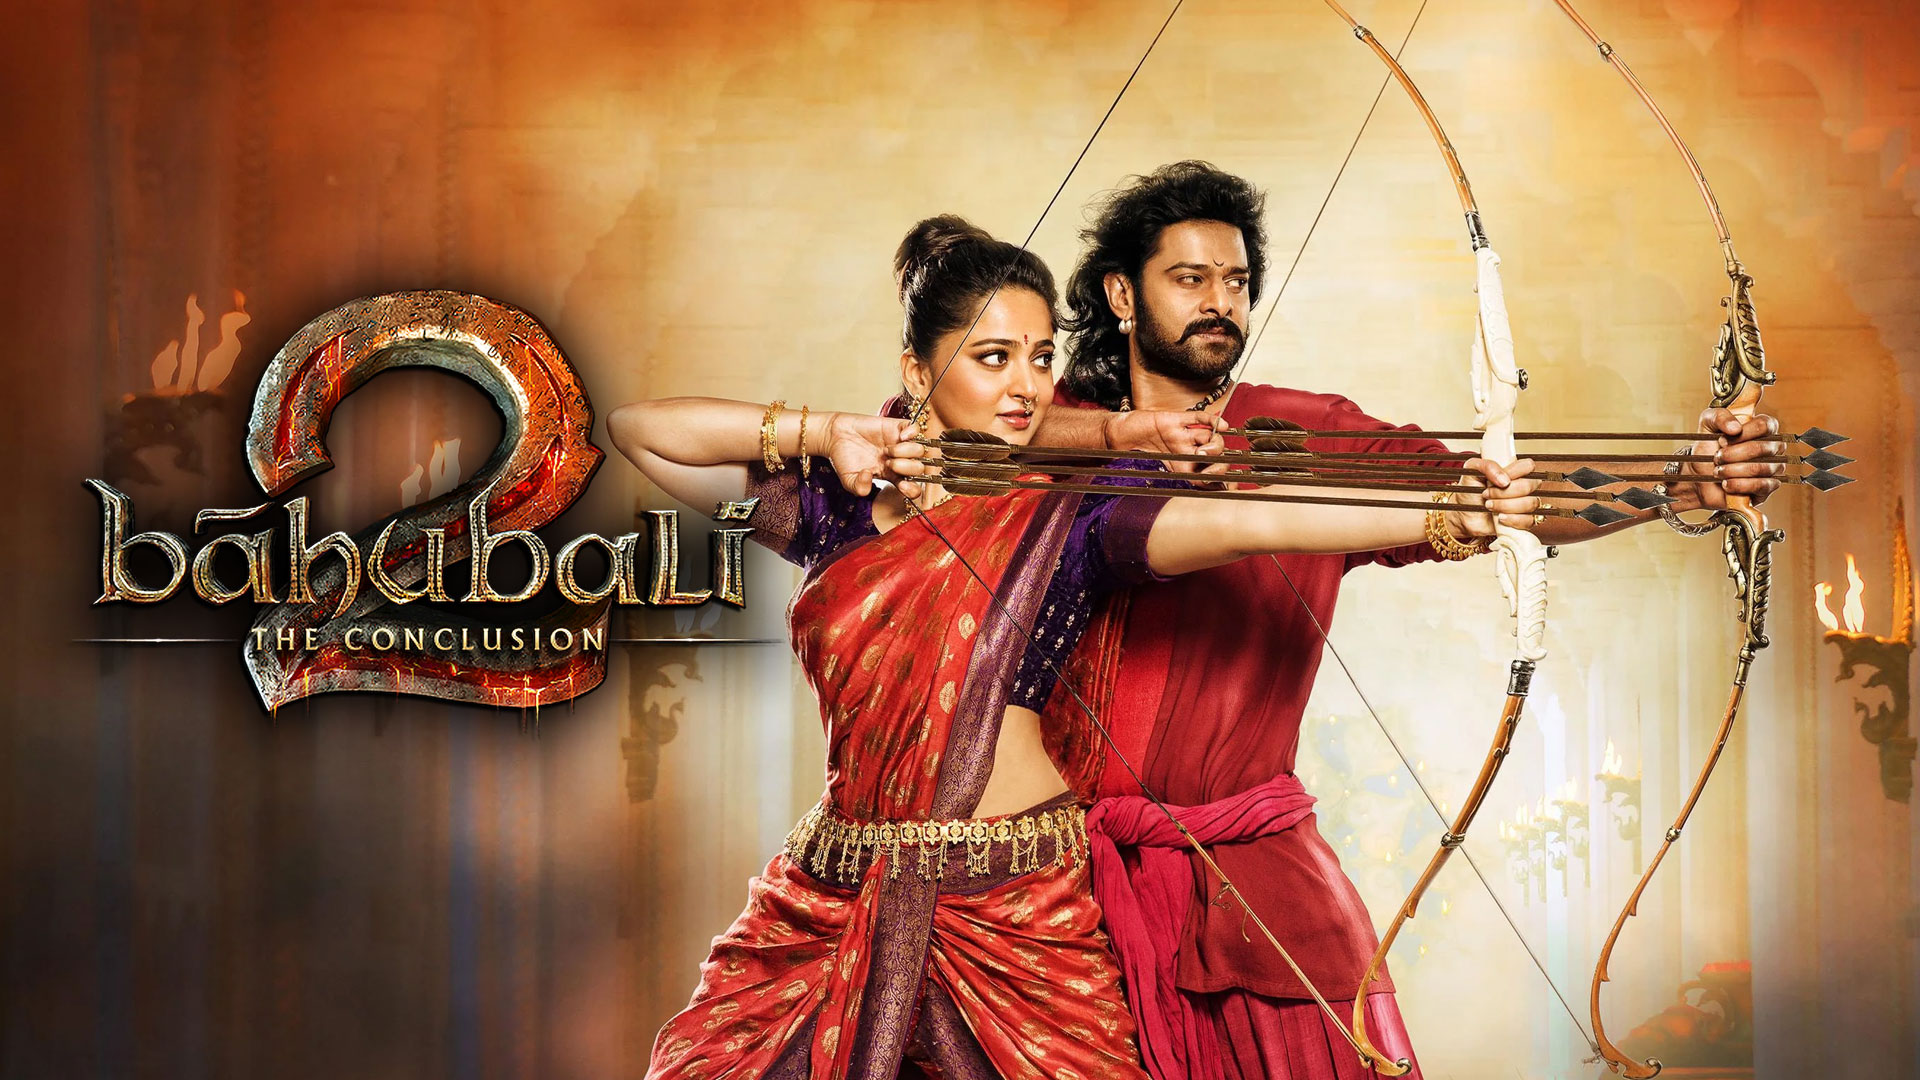 clifford cobb recommends bahubali hd movie free download pic